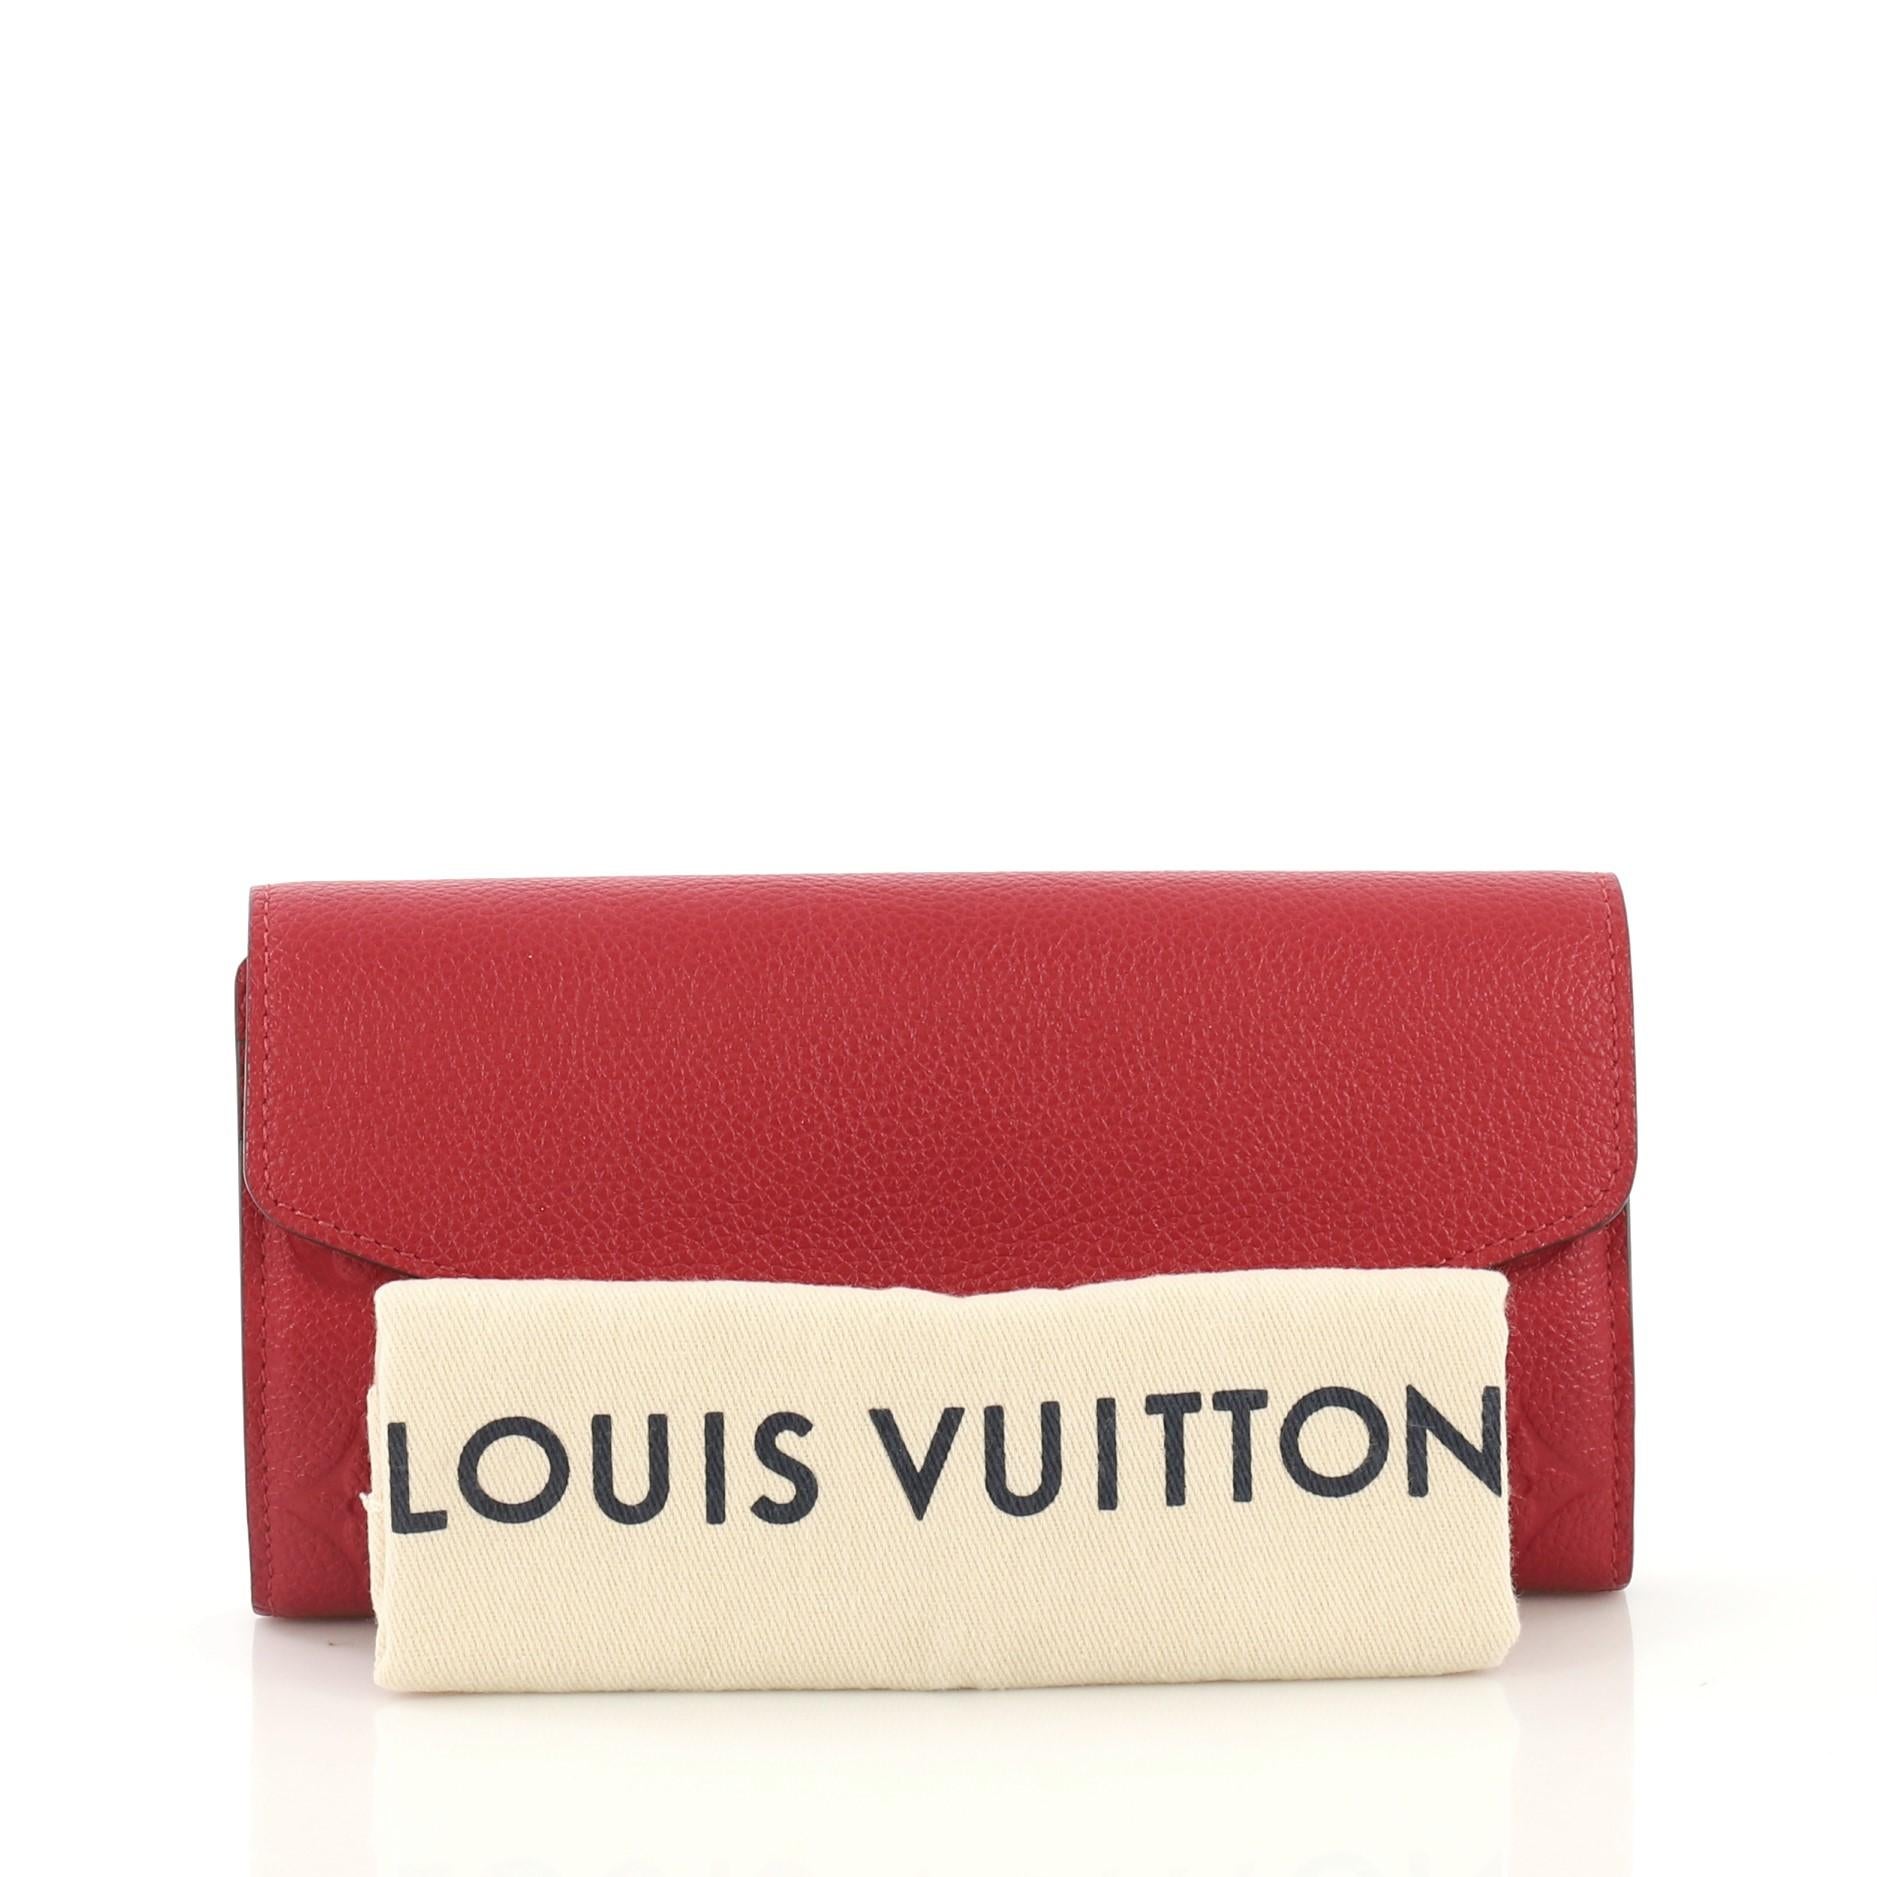 This Louis Vuitton Sarah Wallet NM Monogram Empreinte Leather, crafted from red monogram empreinte leather, features an envelope-style frontal flap and gold-tone hardware. Its snap button closure opens to a red leather interior with multiple card